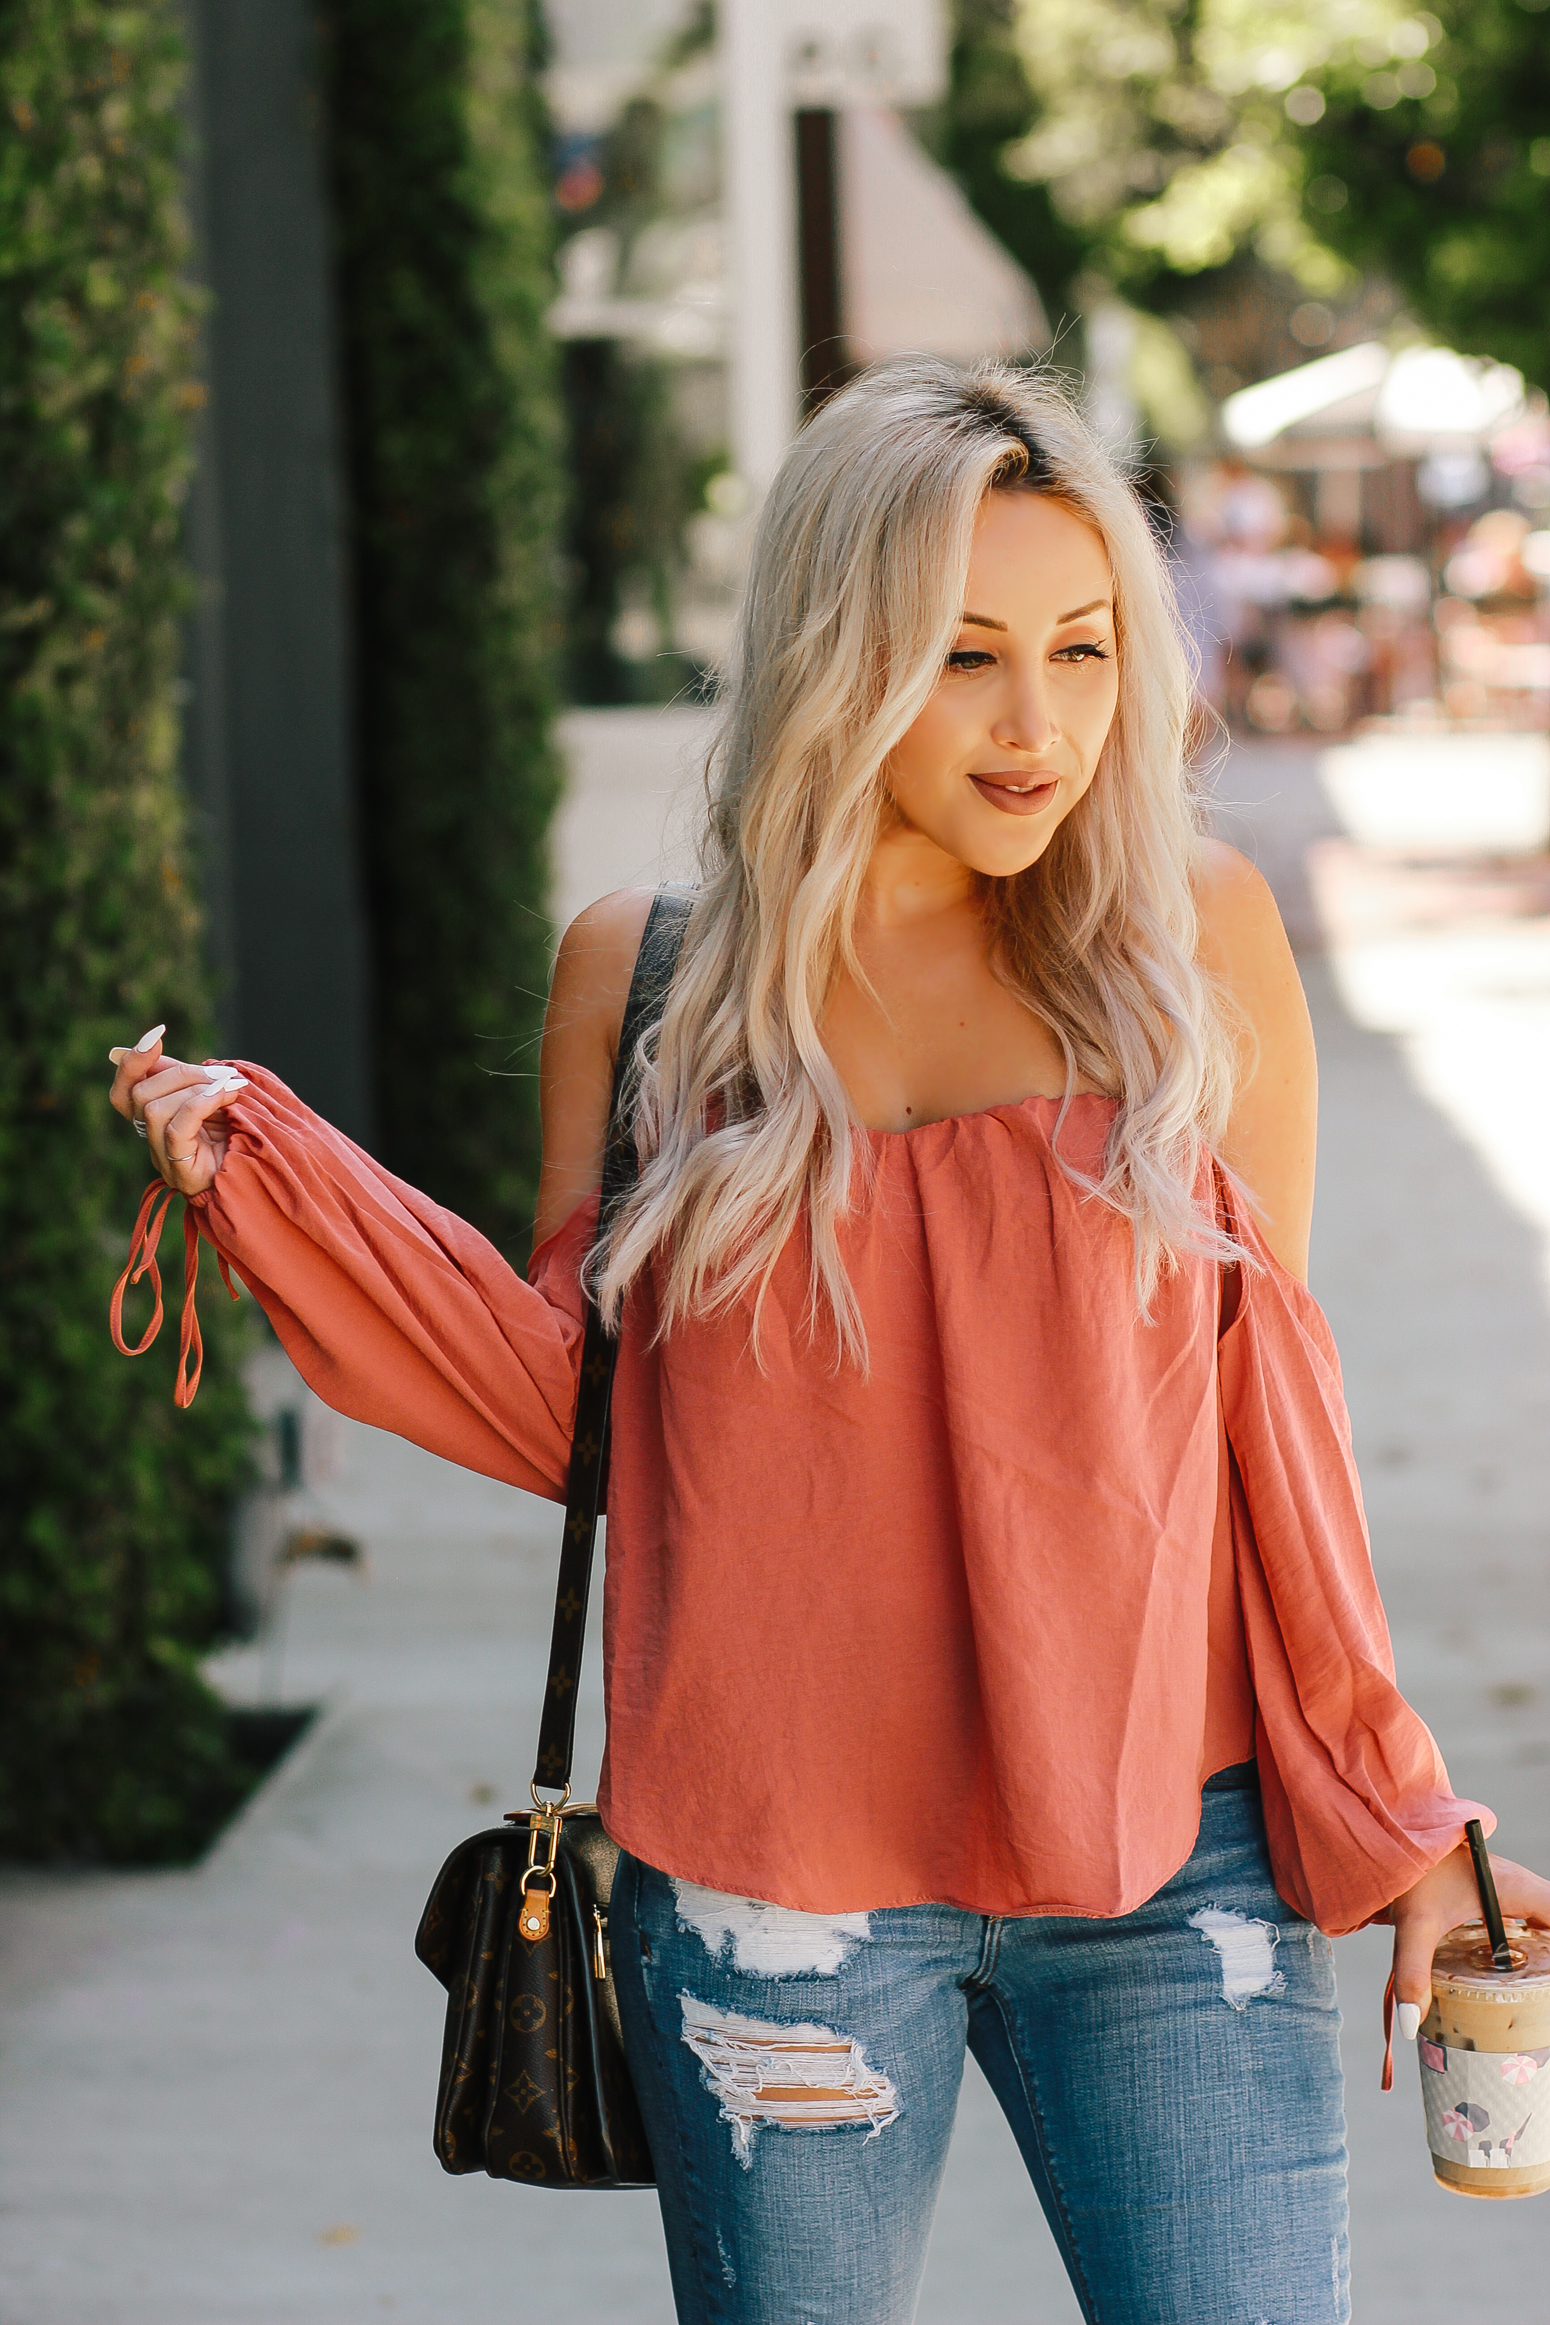 Blondie in the City | Off the Shoulder Top, Distressed Jeans, Sam Edelman Shoes | Summer Fashion